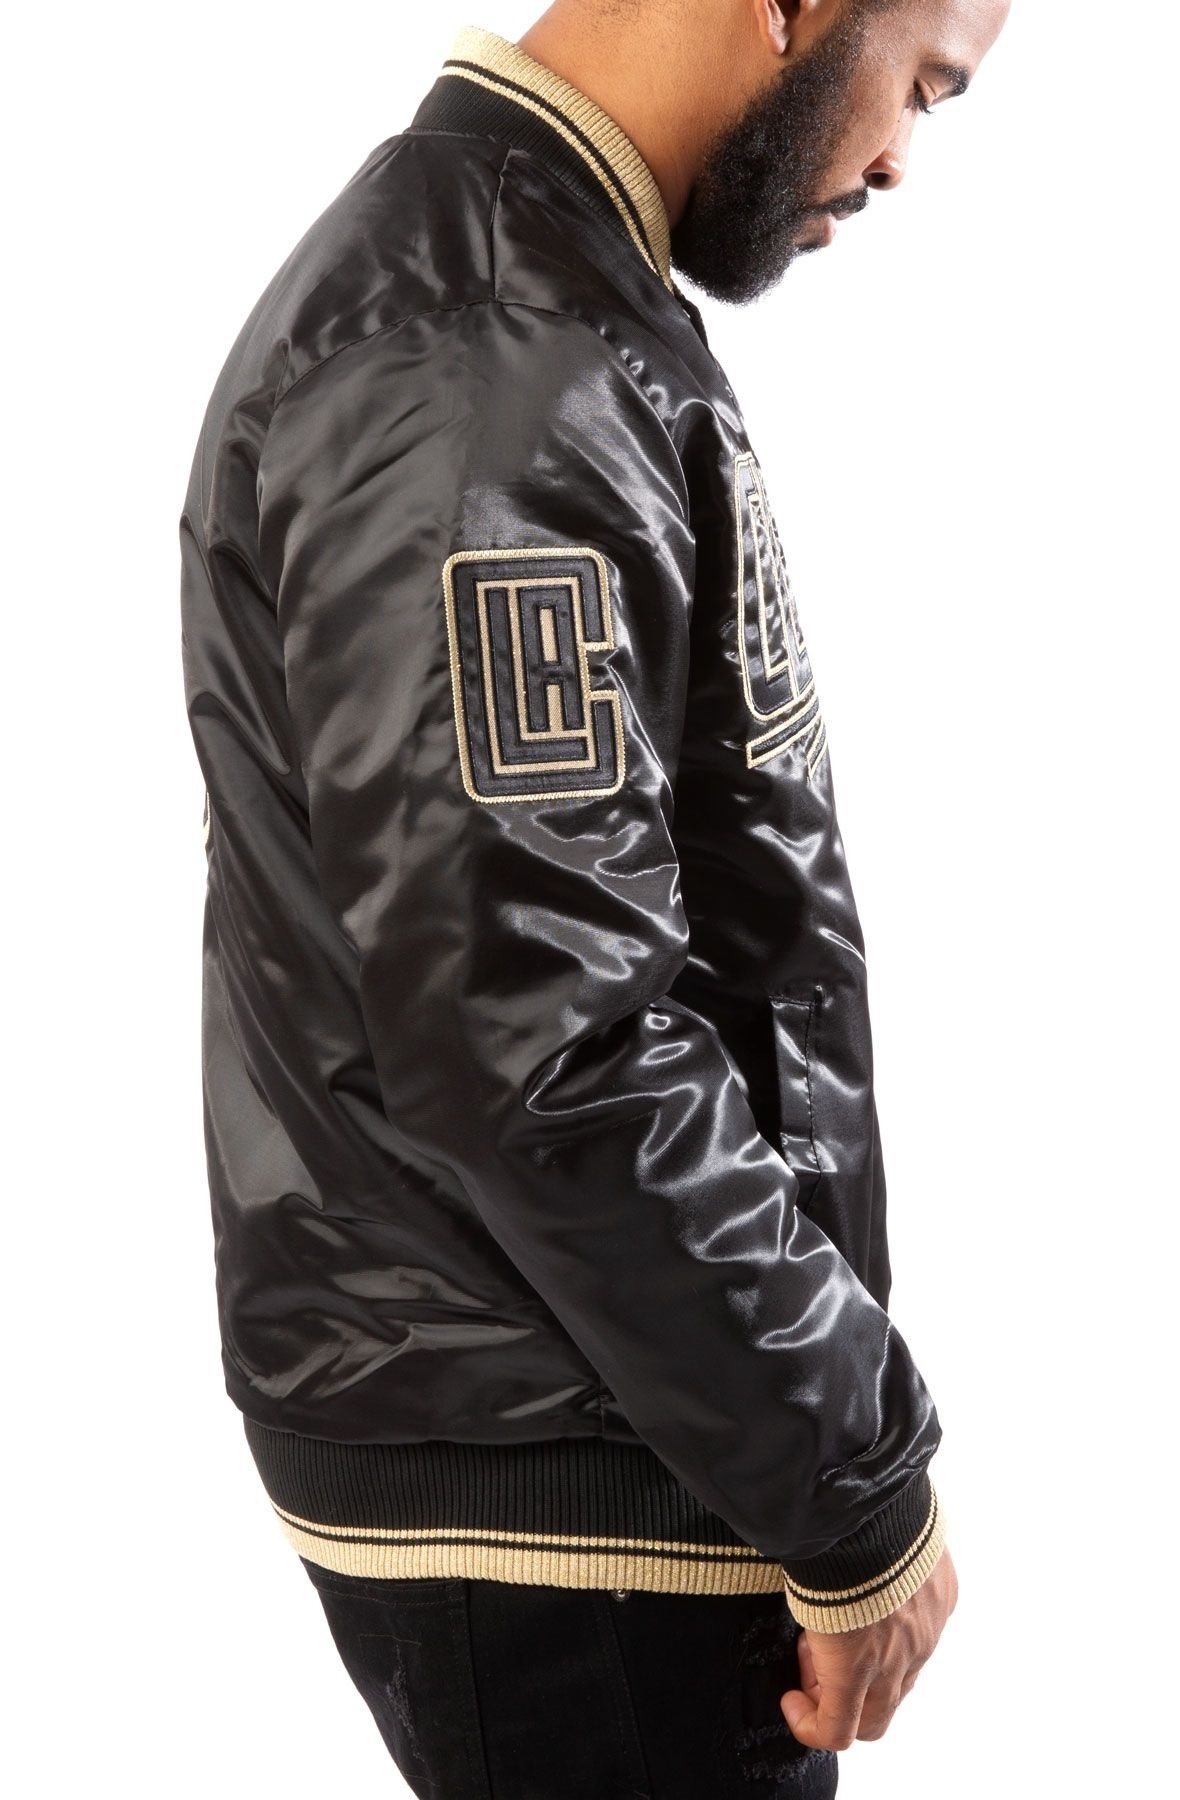 Los Angeles Clippers Black And Gold Satin Bomber Jacket